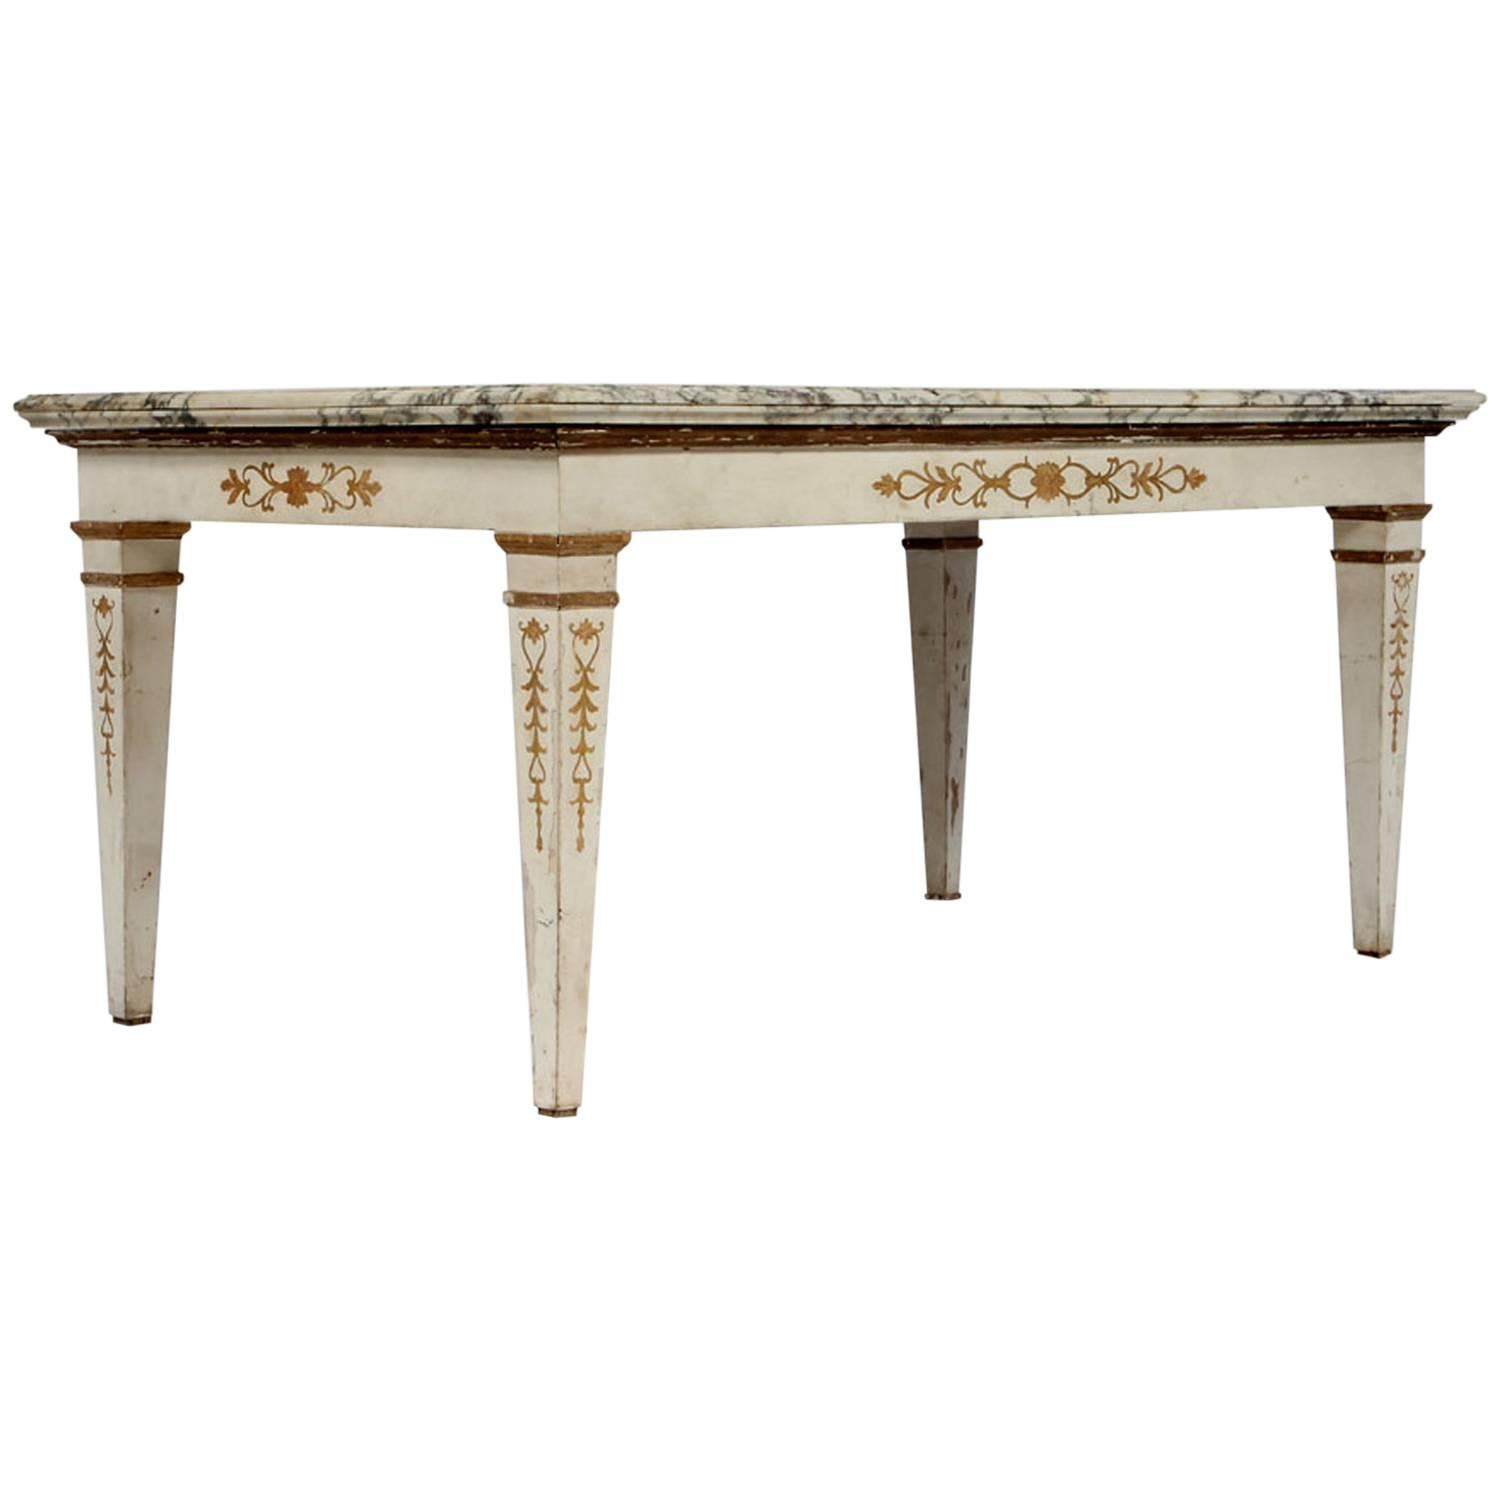 Neoclassical Console Table Painted White and Gold Details For Sale